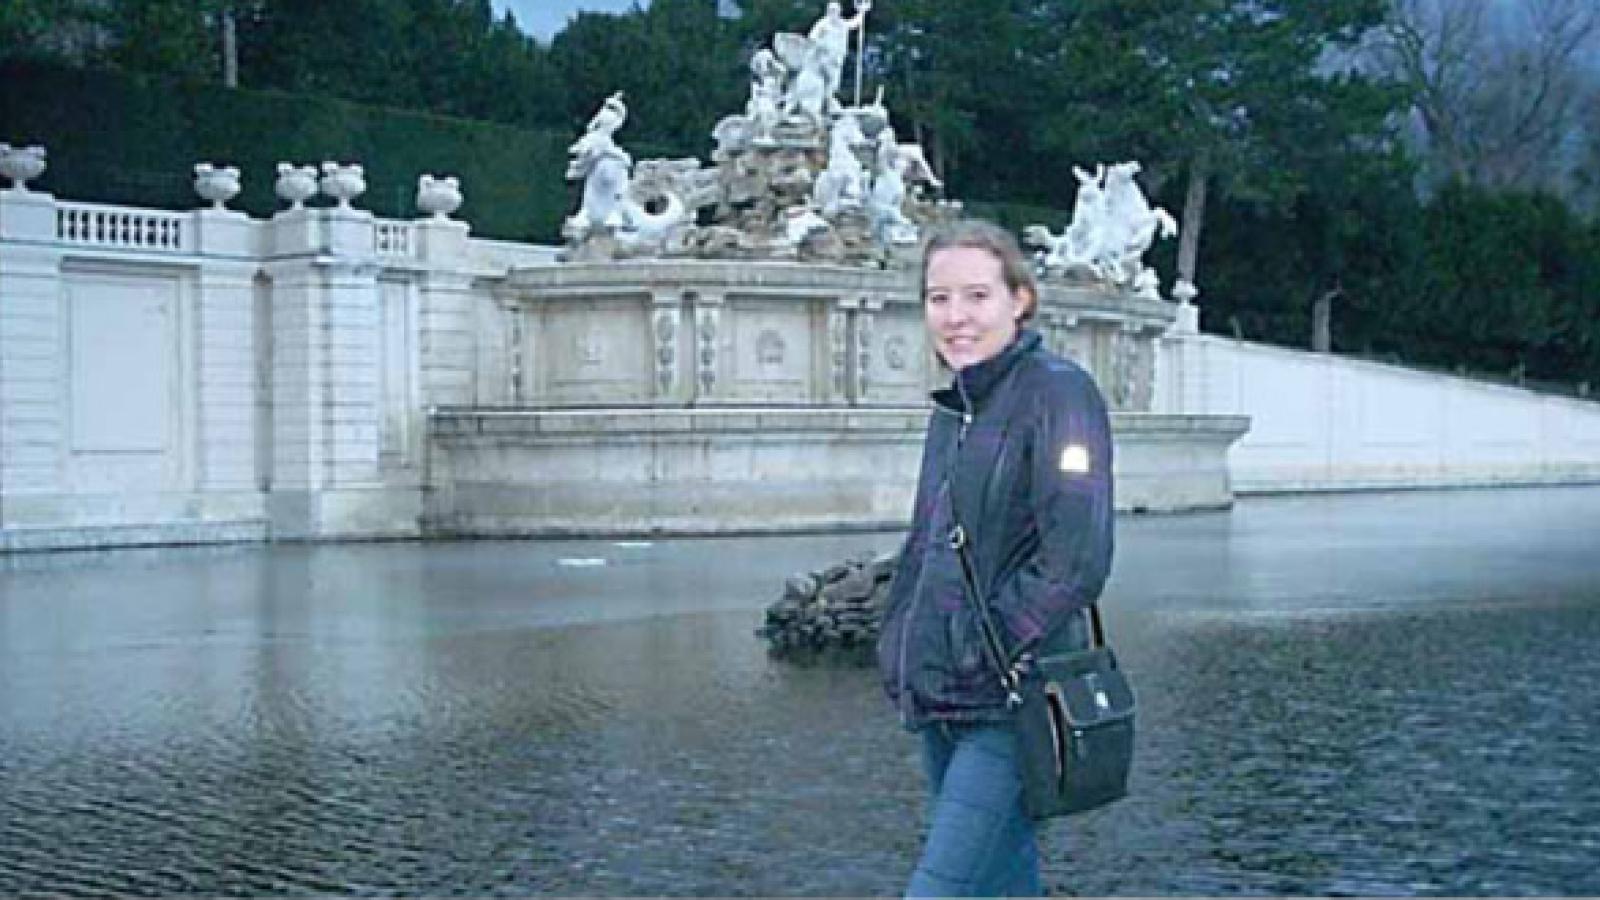 Michelle Peasley in front of an Austrian monument.